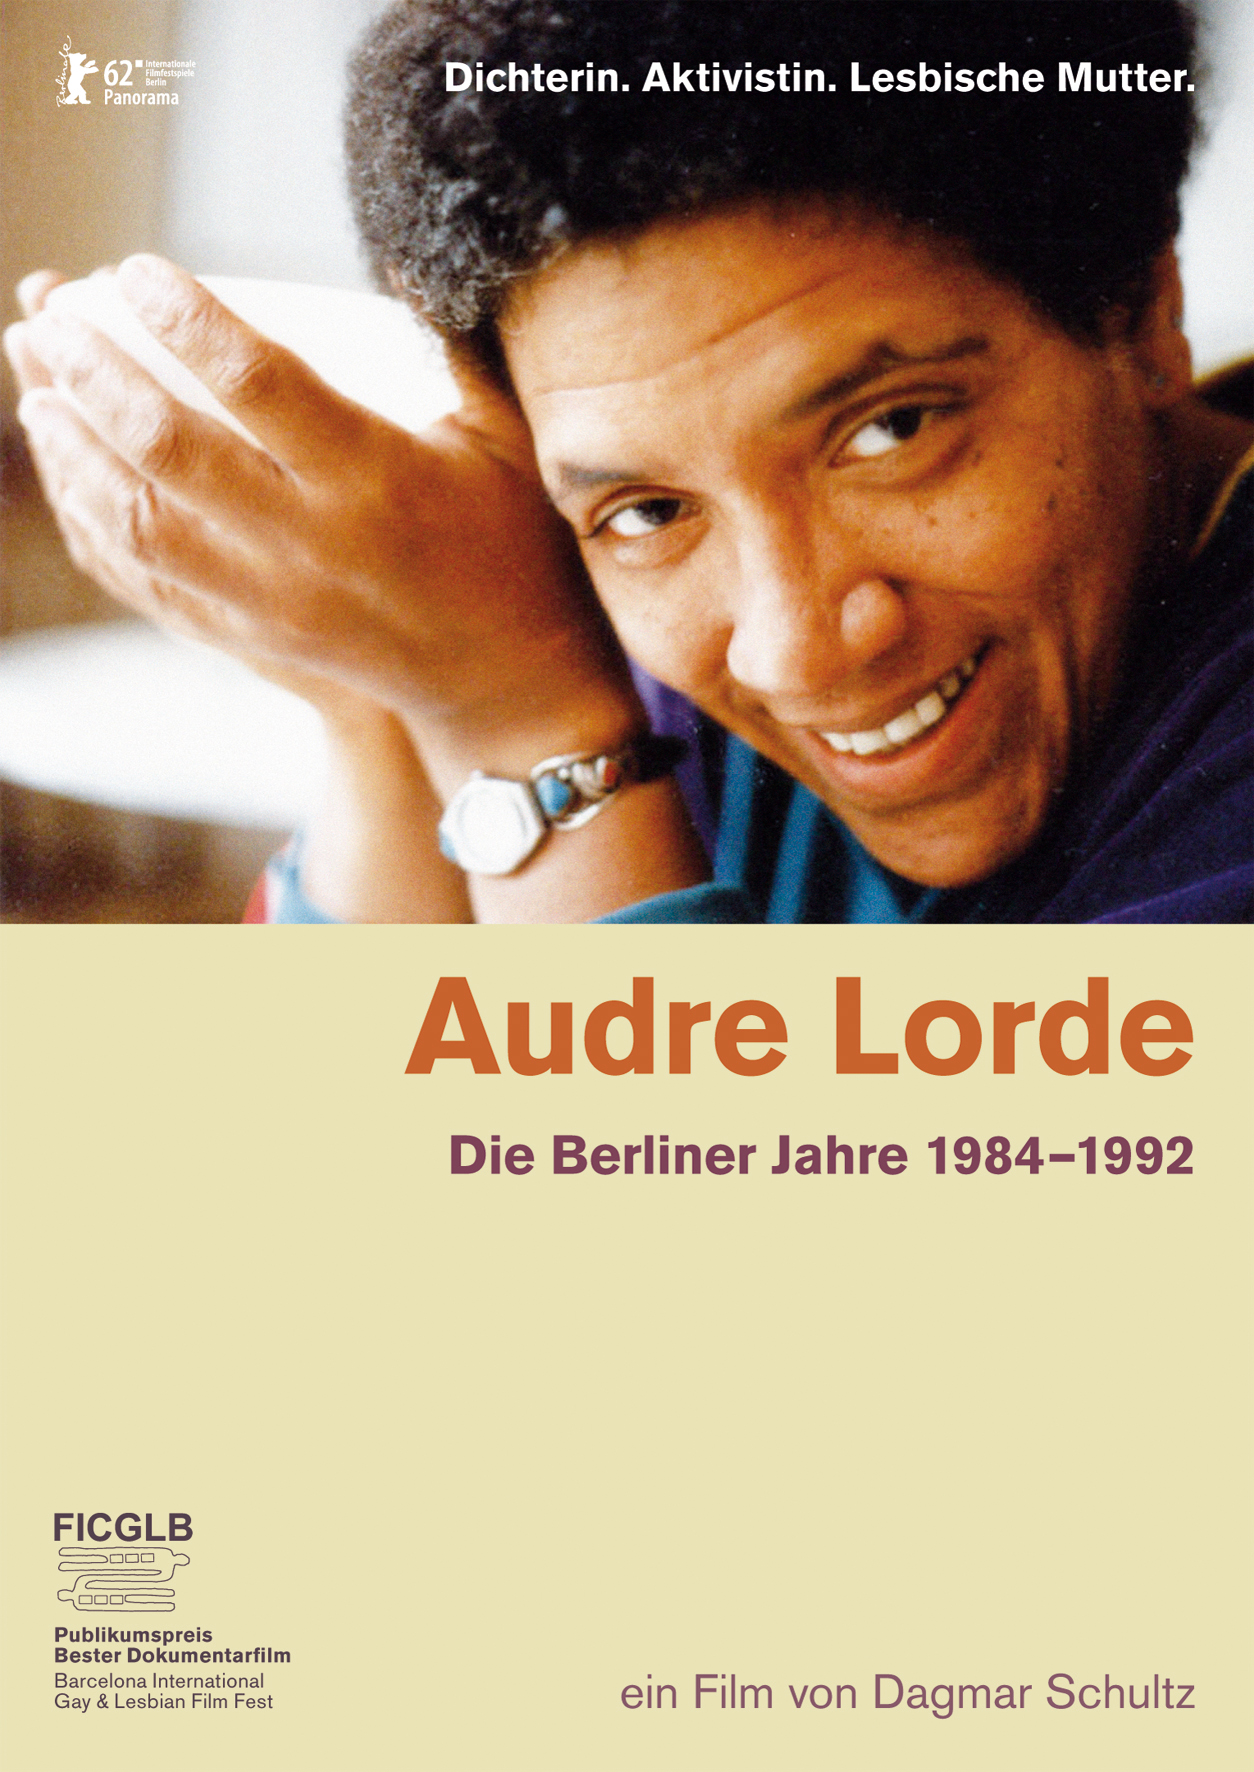 Audre Lorde - The Berlin Years 1984 -1992